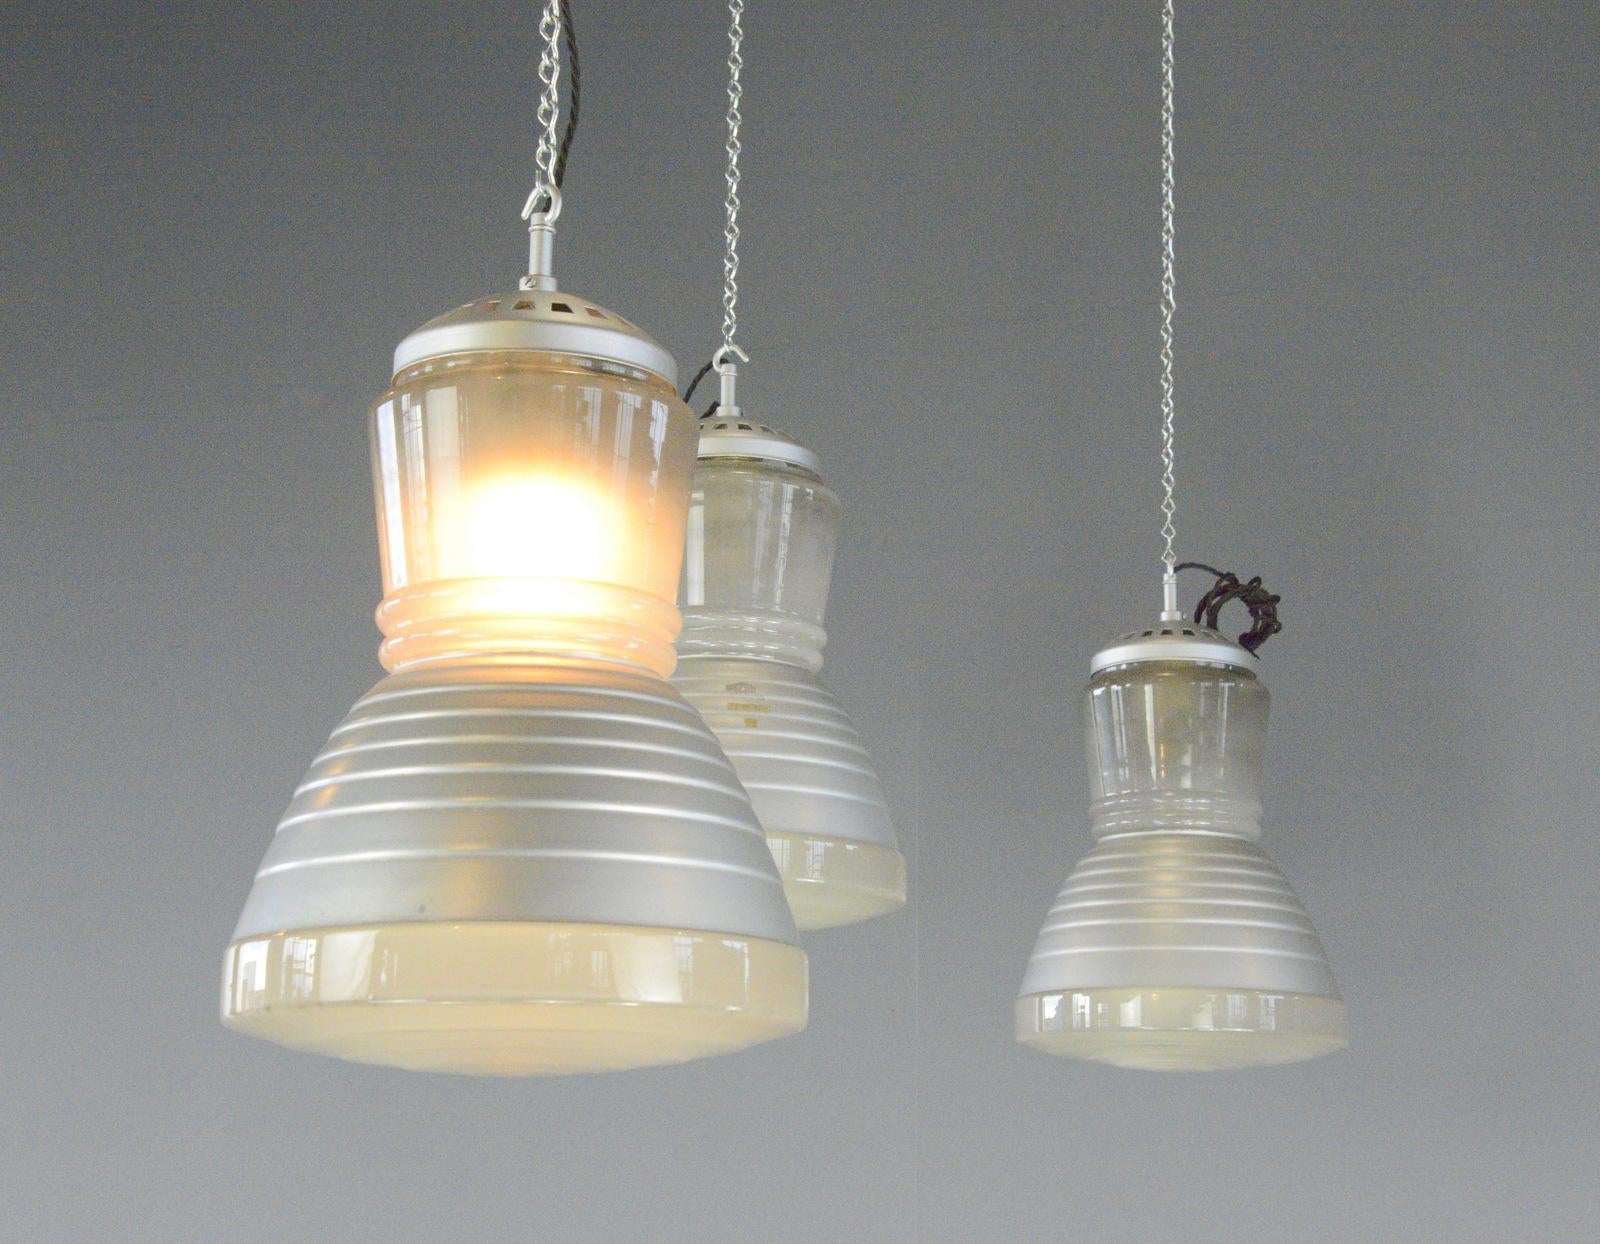 Pendant Lights By Adolf Meyer For Zeiss Ikon Circa 1930s

- Price is per light (10 available)
- Moulded glass with mercury inner reflectors
- Takes E27 fitting bulbs
- Comes with 150cm of black twist cable and silver chain
- Designed by Adolf